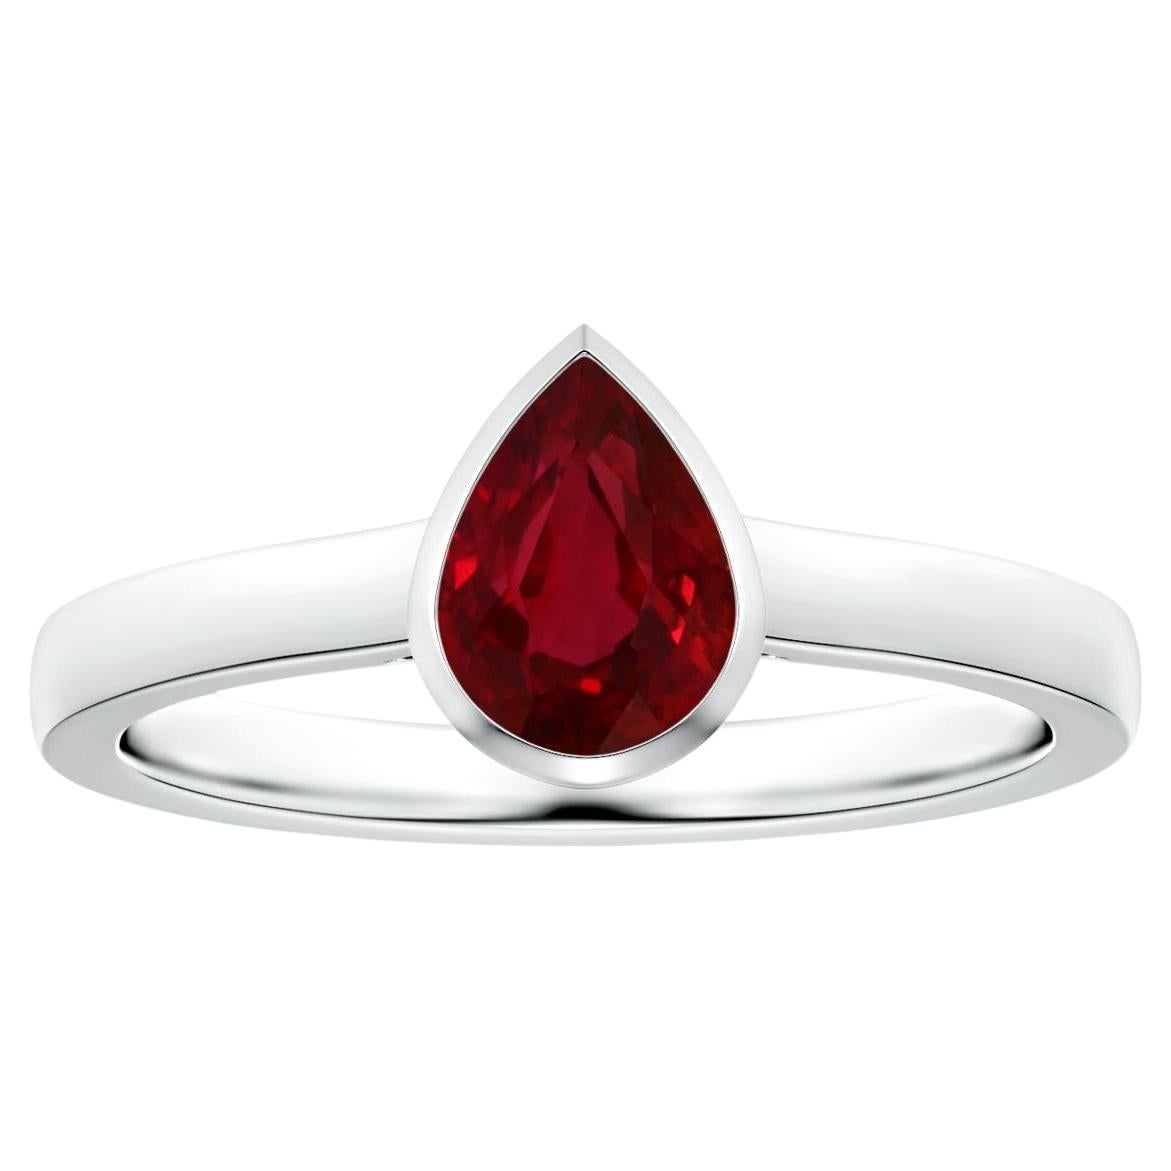 ANGARA Bezel-Set GIA Certified Pear-Shaped Ruby Solitaire Ring in Platinum